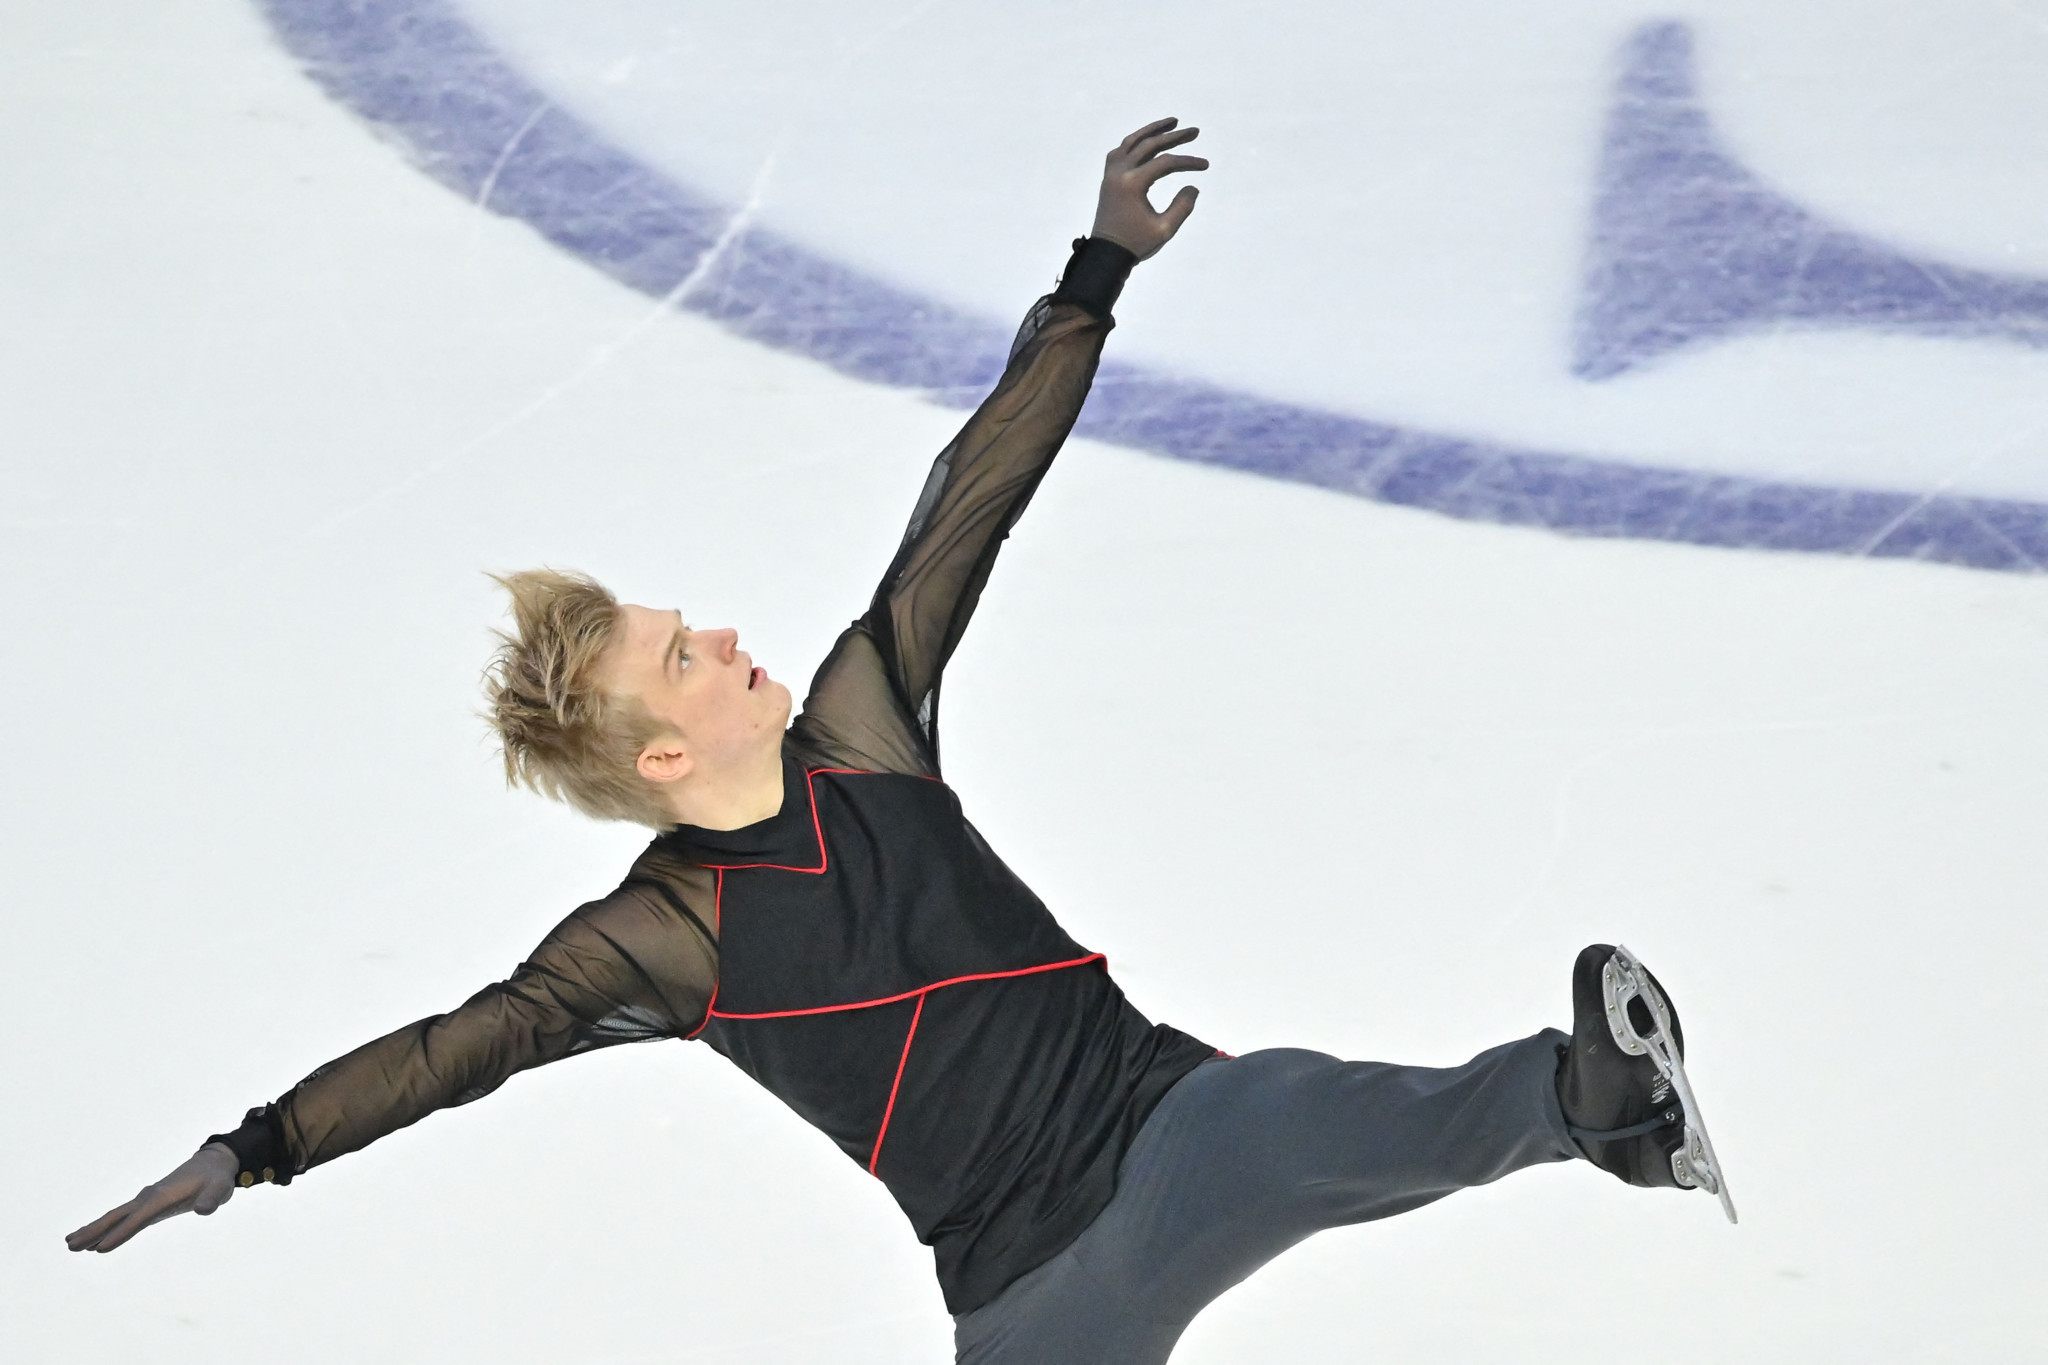 Italy's Daniel Grassl has trained for the European Figure Skating Championships in Espoo under the guidance of controversial Russian coach Eteri Tutberidze in Moscow ©Getty Images